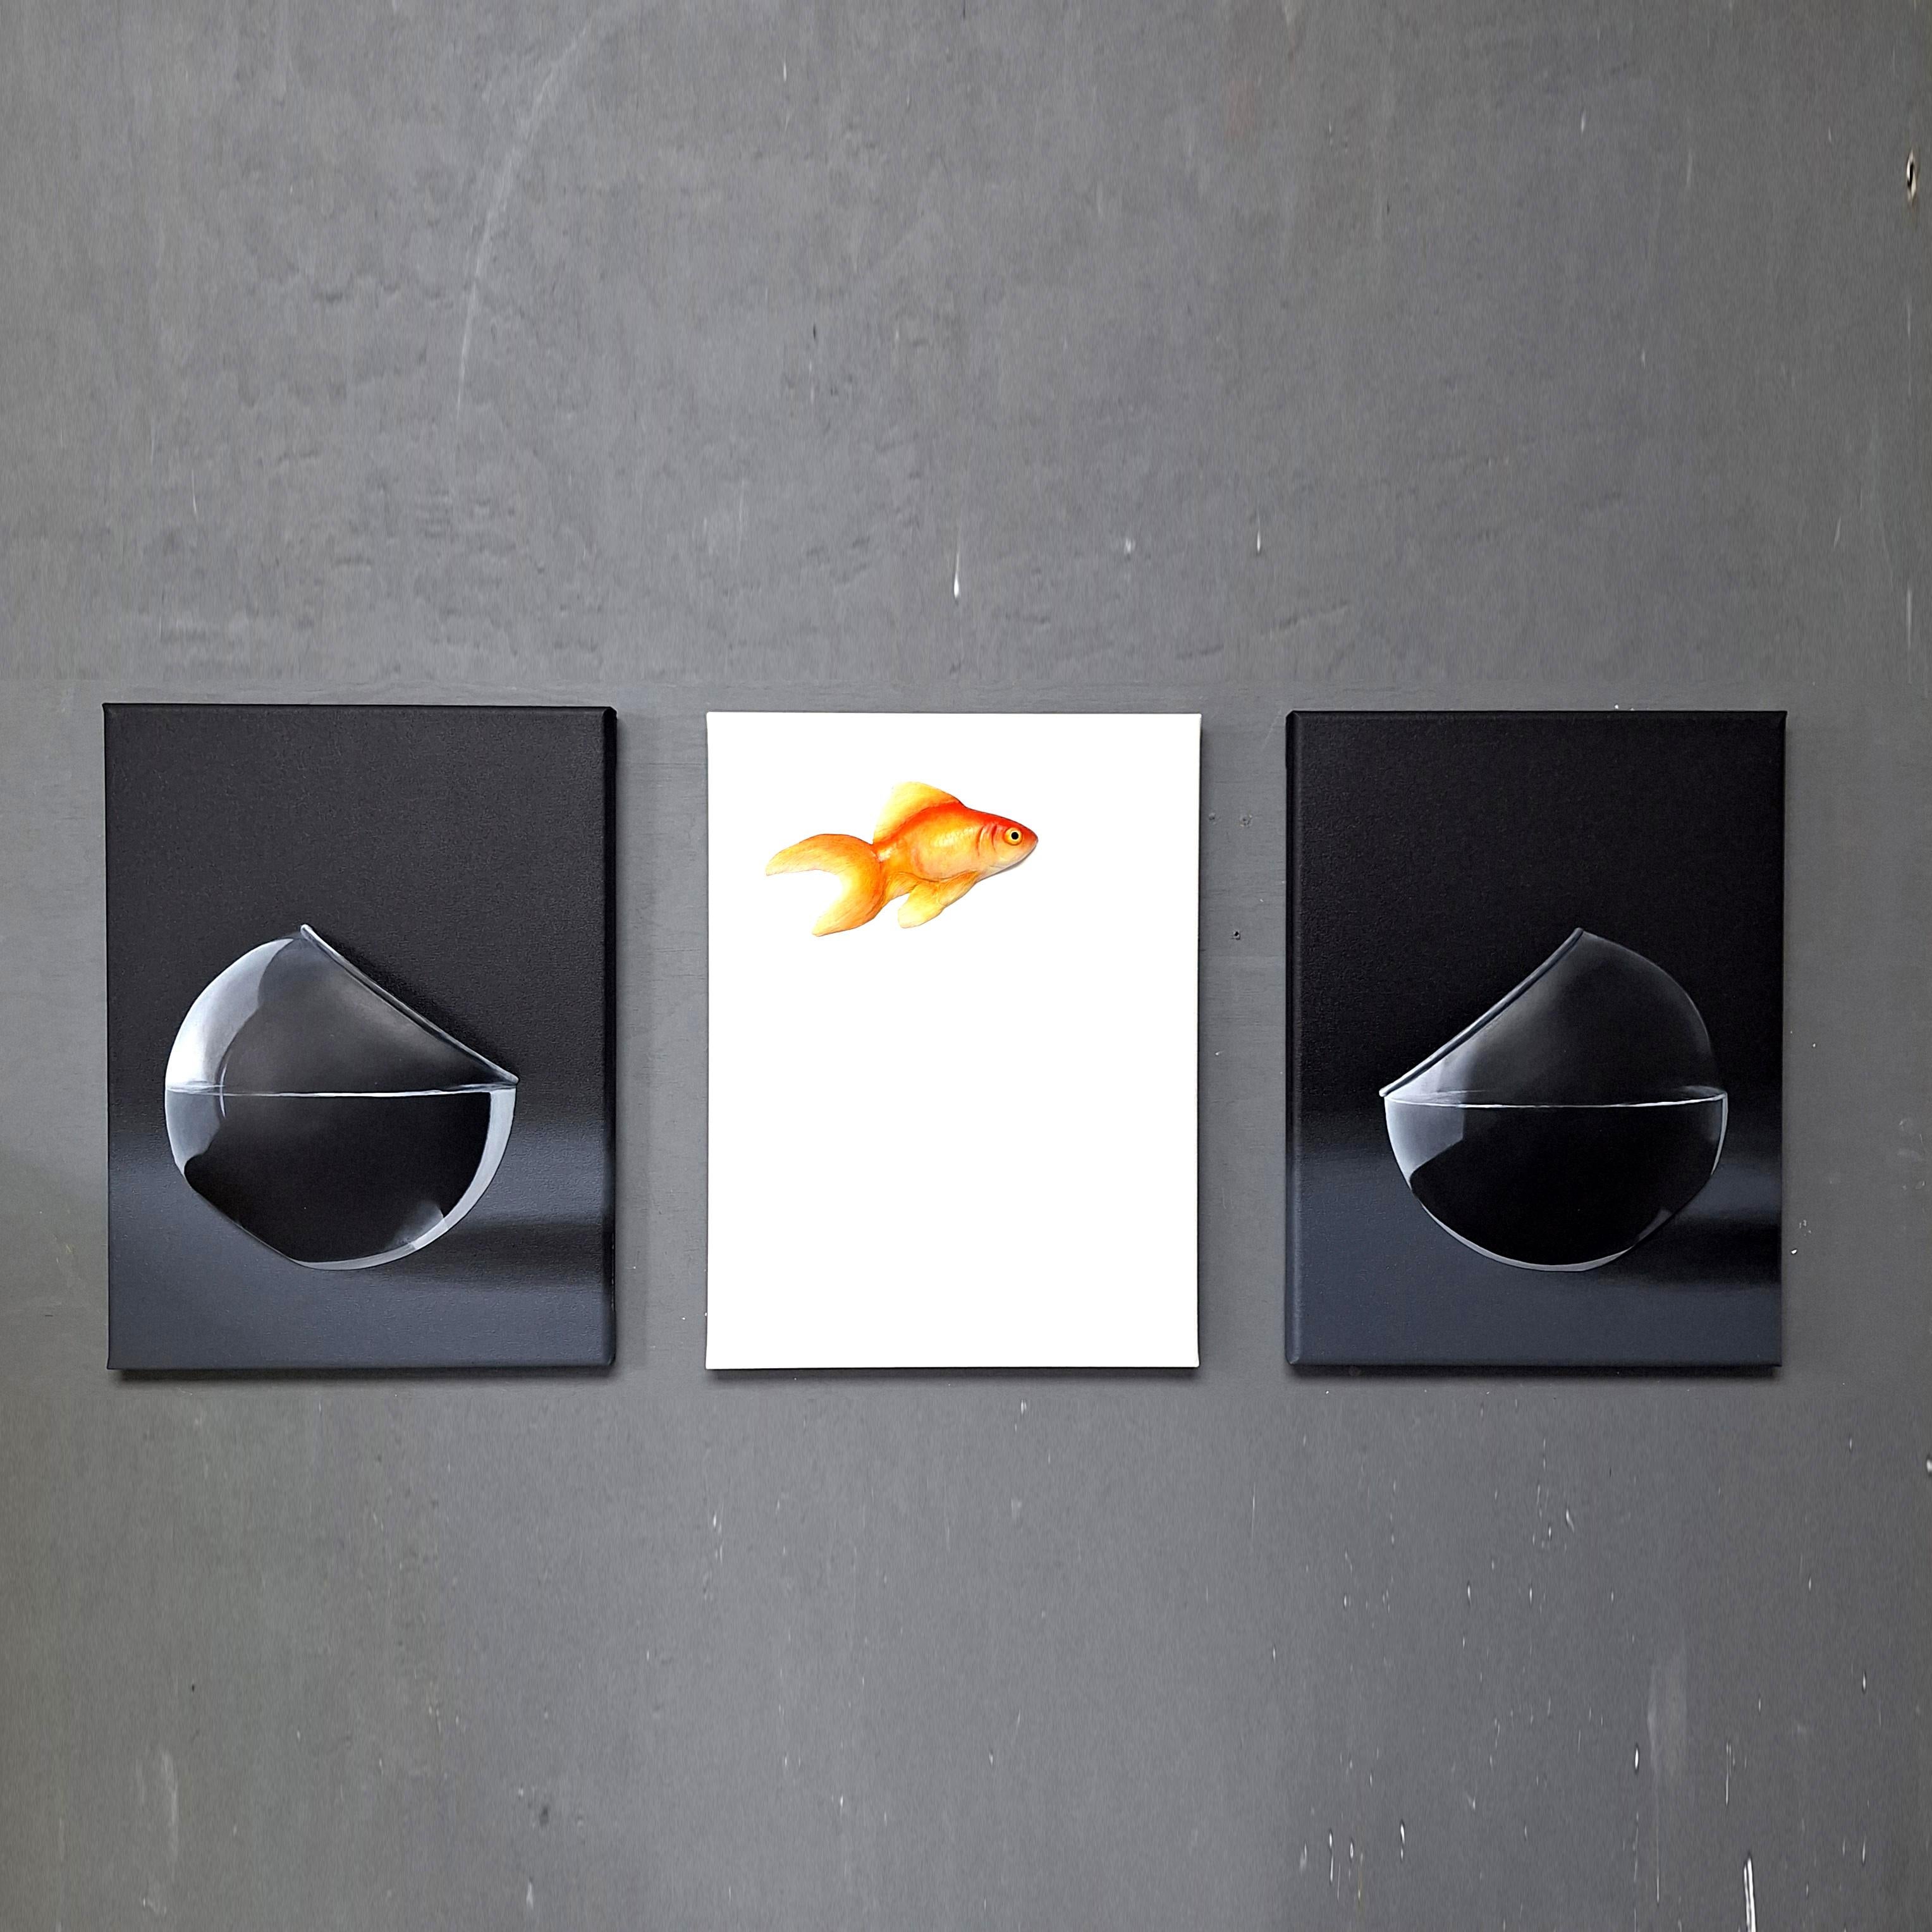 In "Leap of faith. Goldfish." by Henk Jan Sanderman, the artist ingeniously captures the essence of breaking free from the constraints of familiarity. Through a series of three canvases, Sanderman presents a whimsical journey of a small goldfish